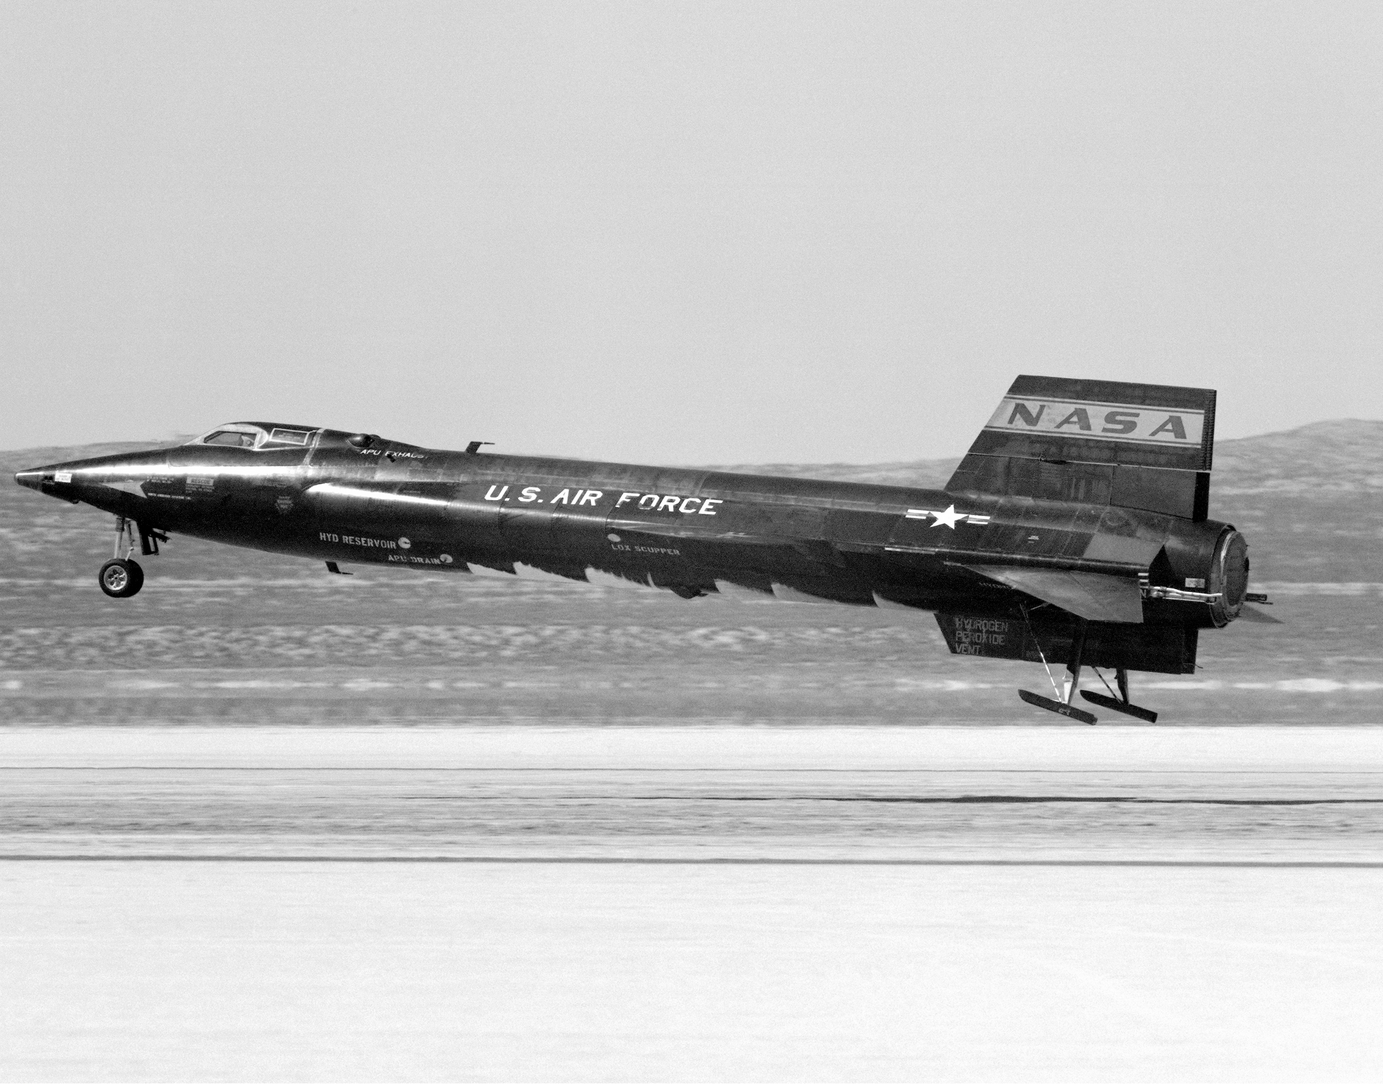  North American Aviation X-15A 56-6672 touches down on Rogers Dry Lake. (NASA)